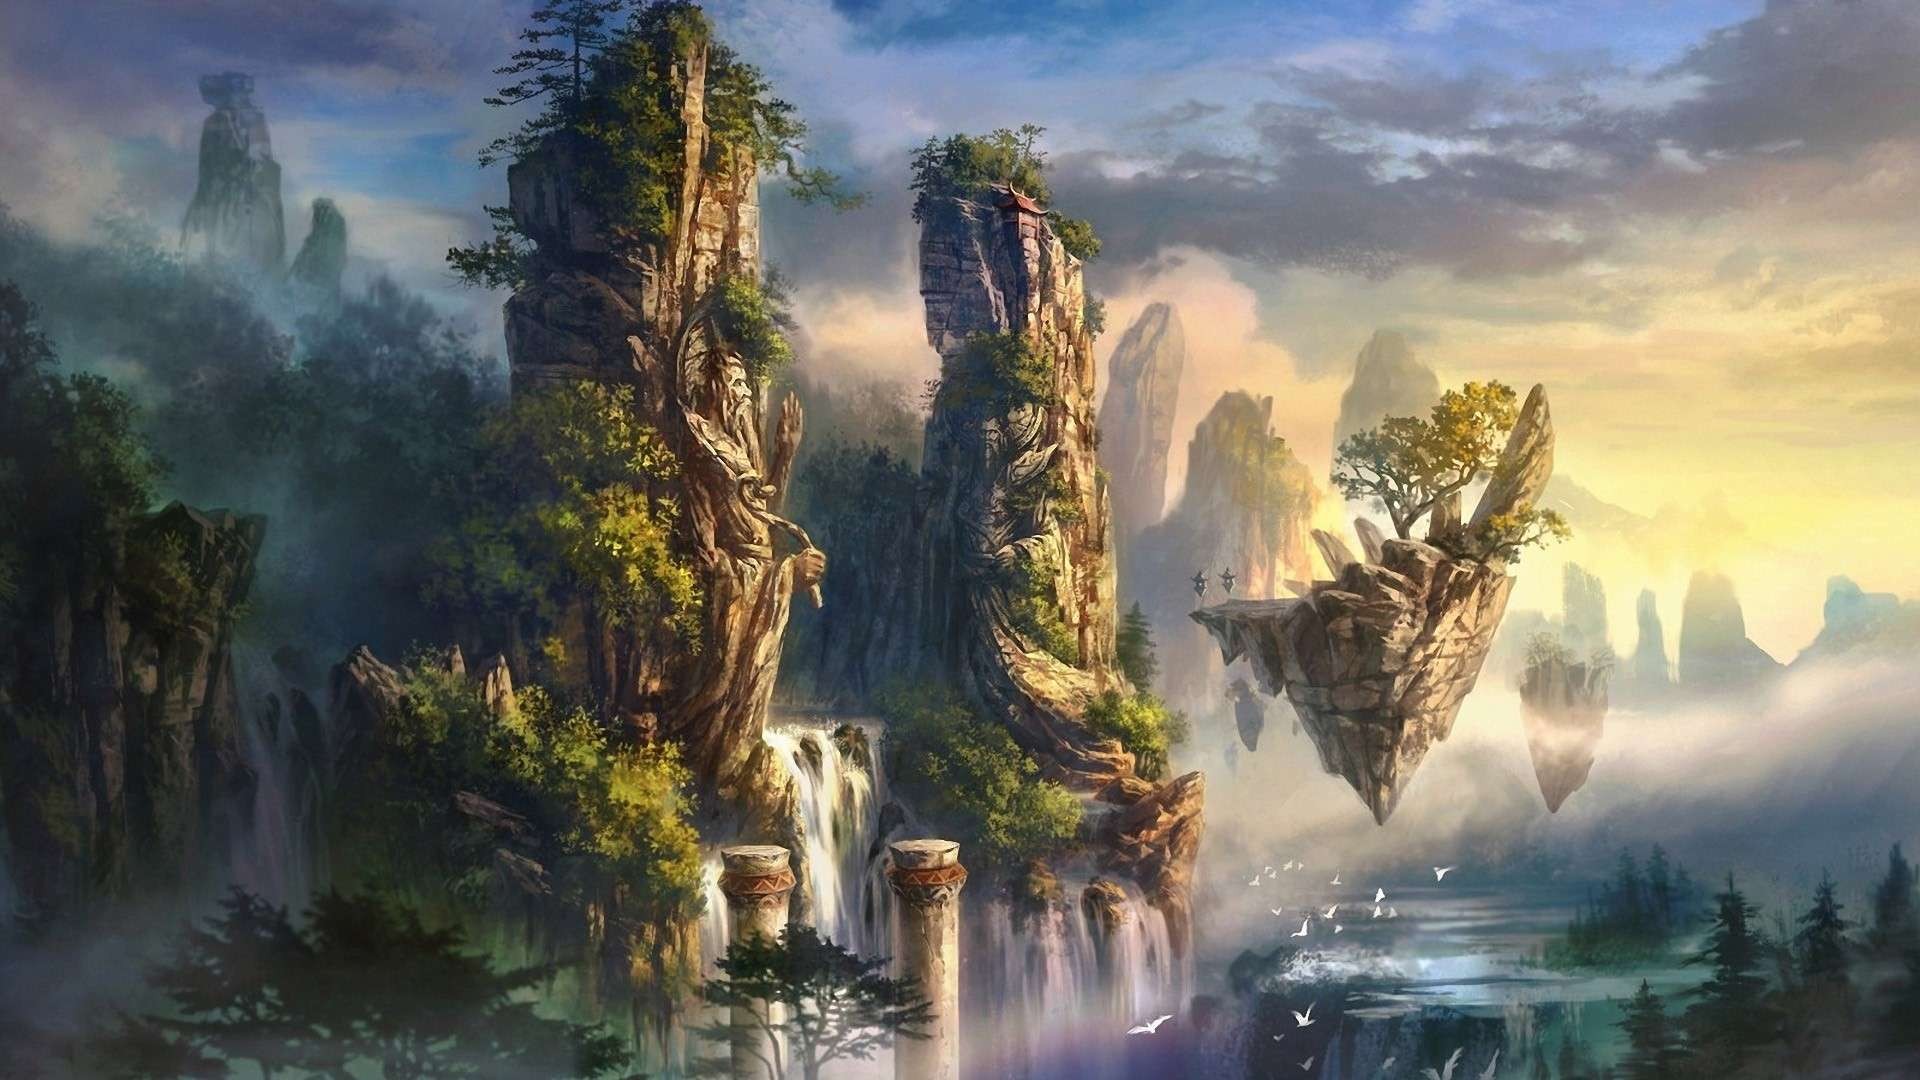 Wallpaper HD Fantasy Art With high-resolution 1920X1080 pixel. You can use this wallpaper for your Desktop Computer Backgrounds, Mac Wallpapers, Android Lock screen or iPhone Screensavers and another smartphone device